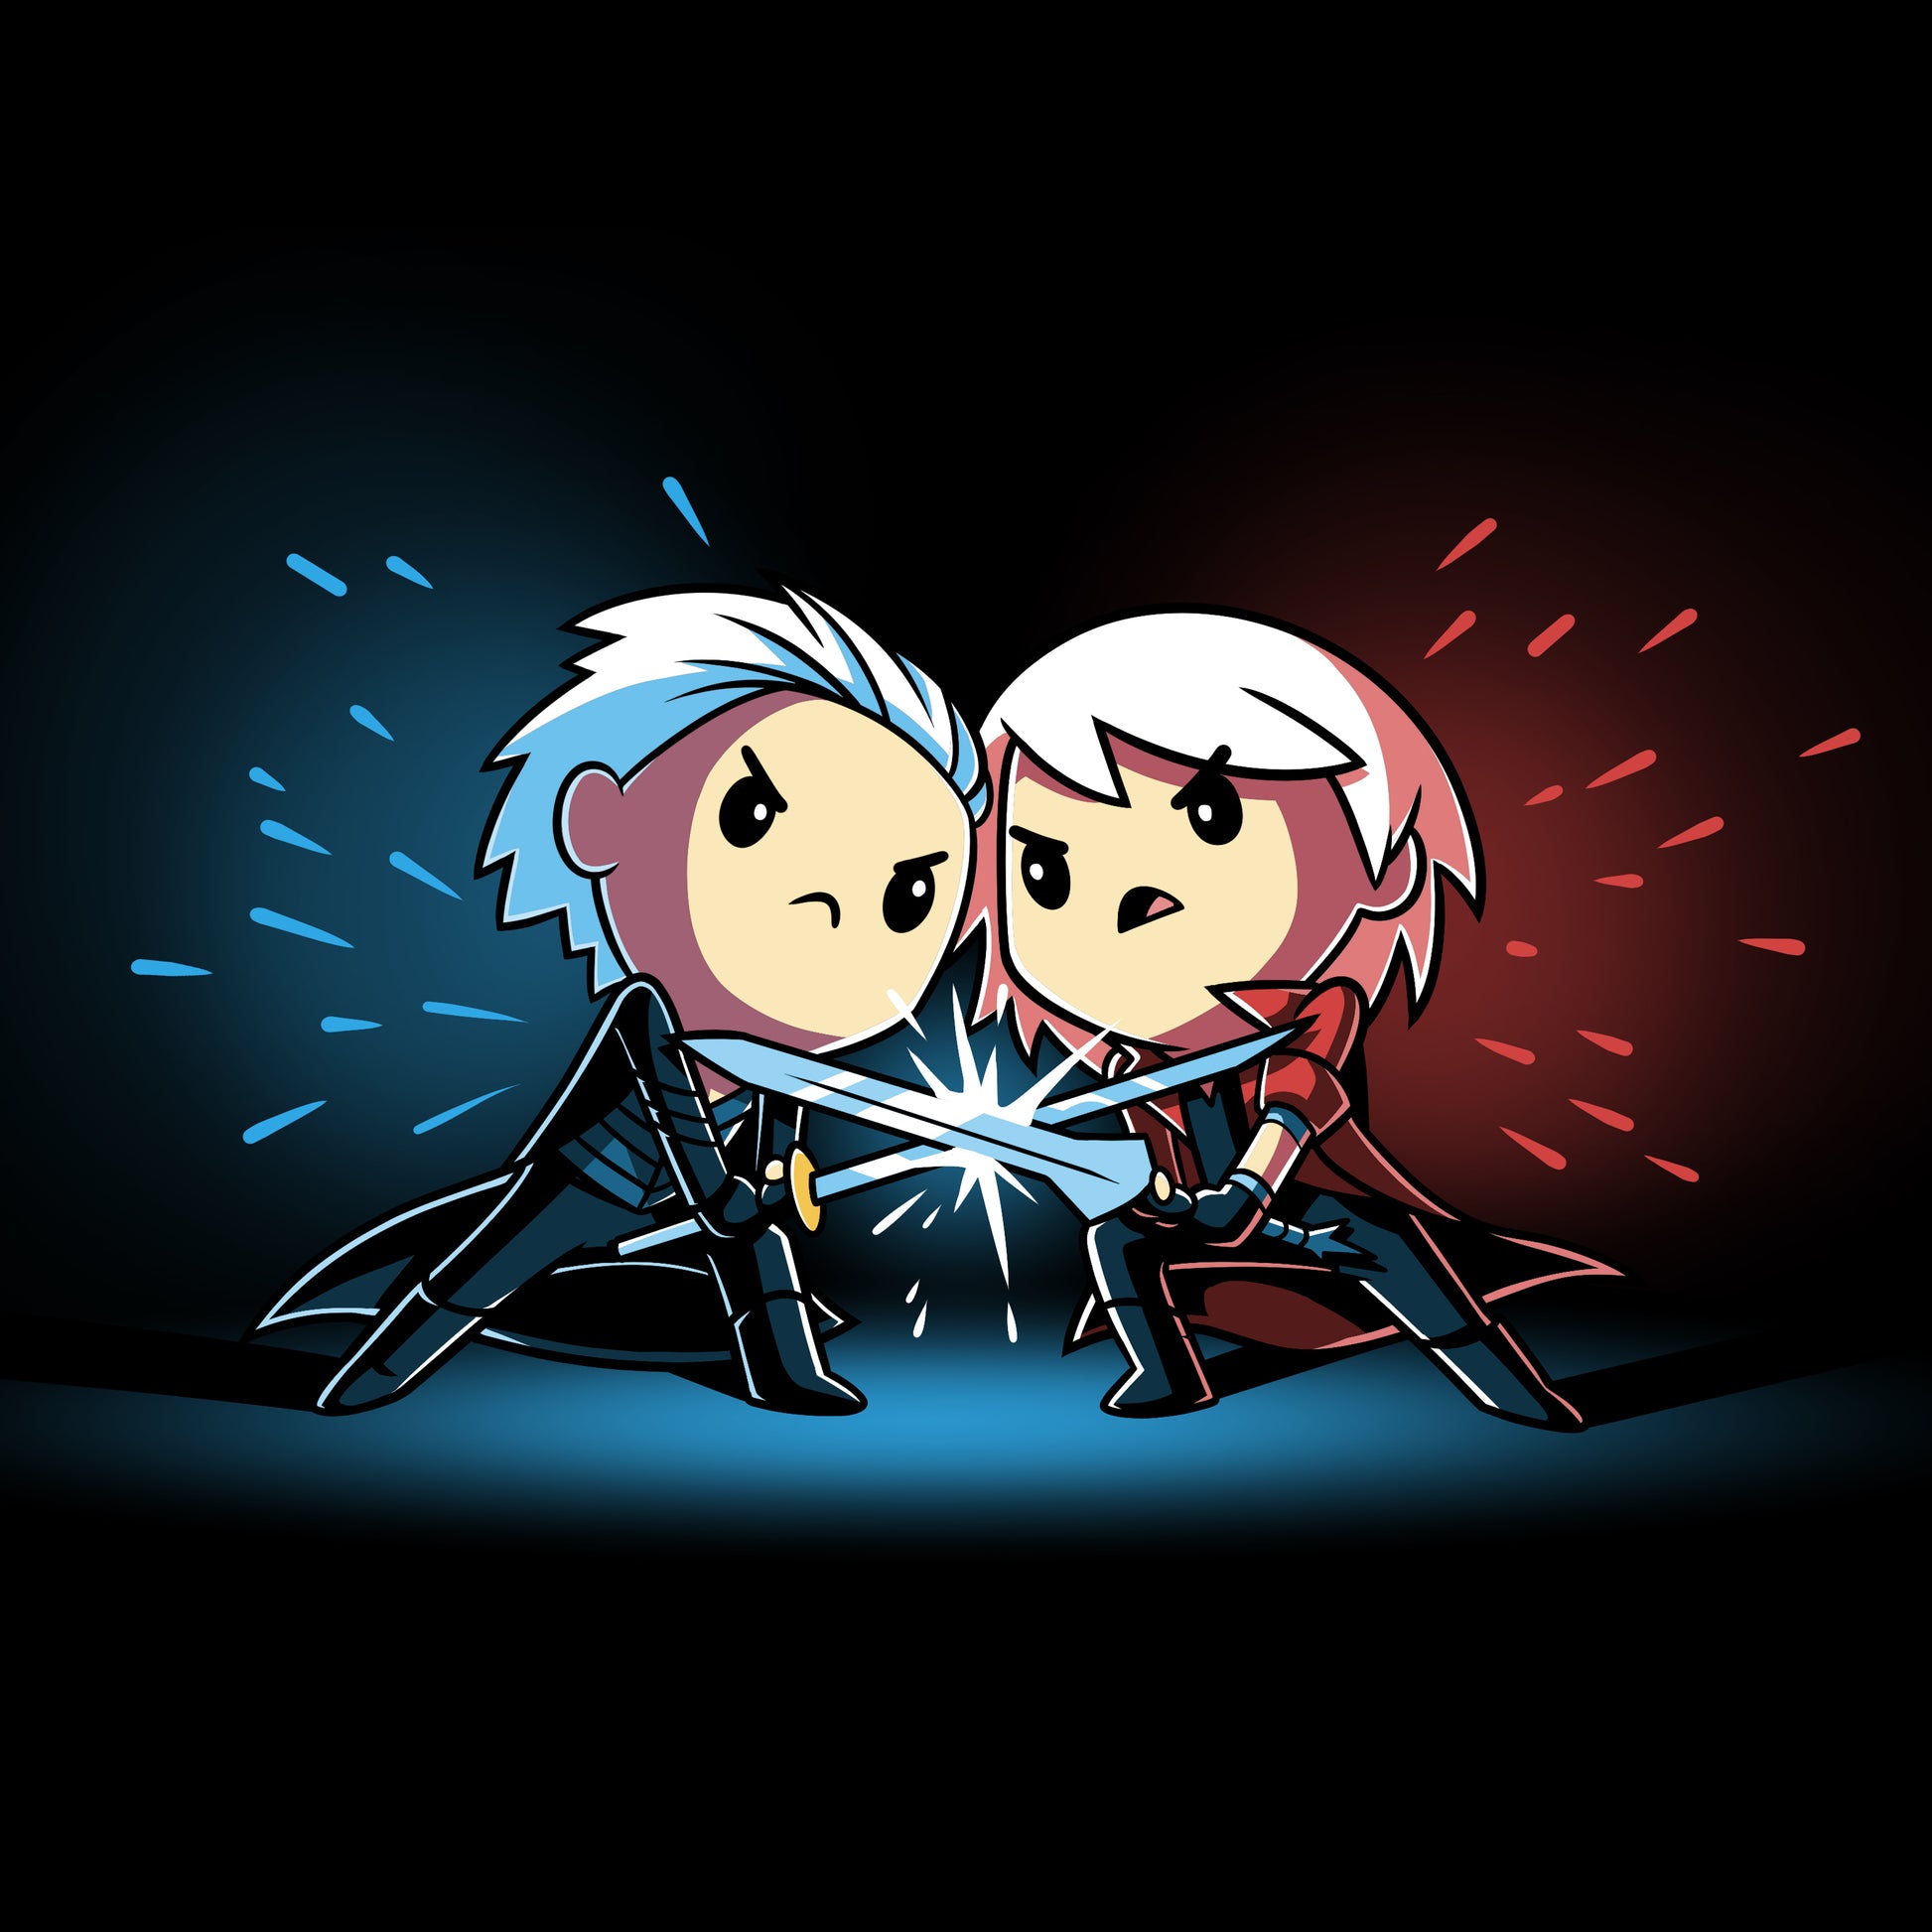 Officially licensed product "Dante Vs. Vergil" by the brand Capcom, characters Dante and Vergil engage in an epic lightsaber duel reminiscent of Devil May Cry.